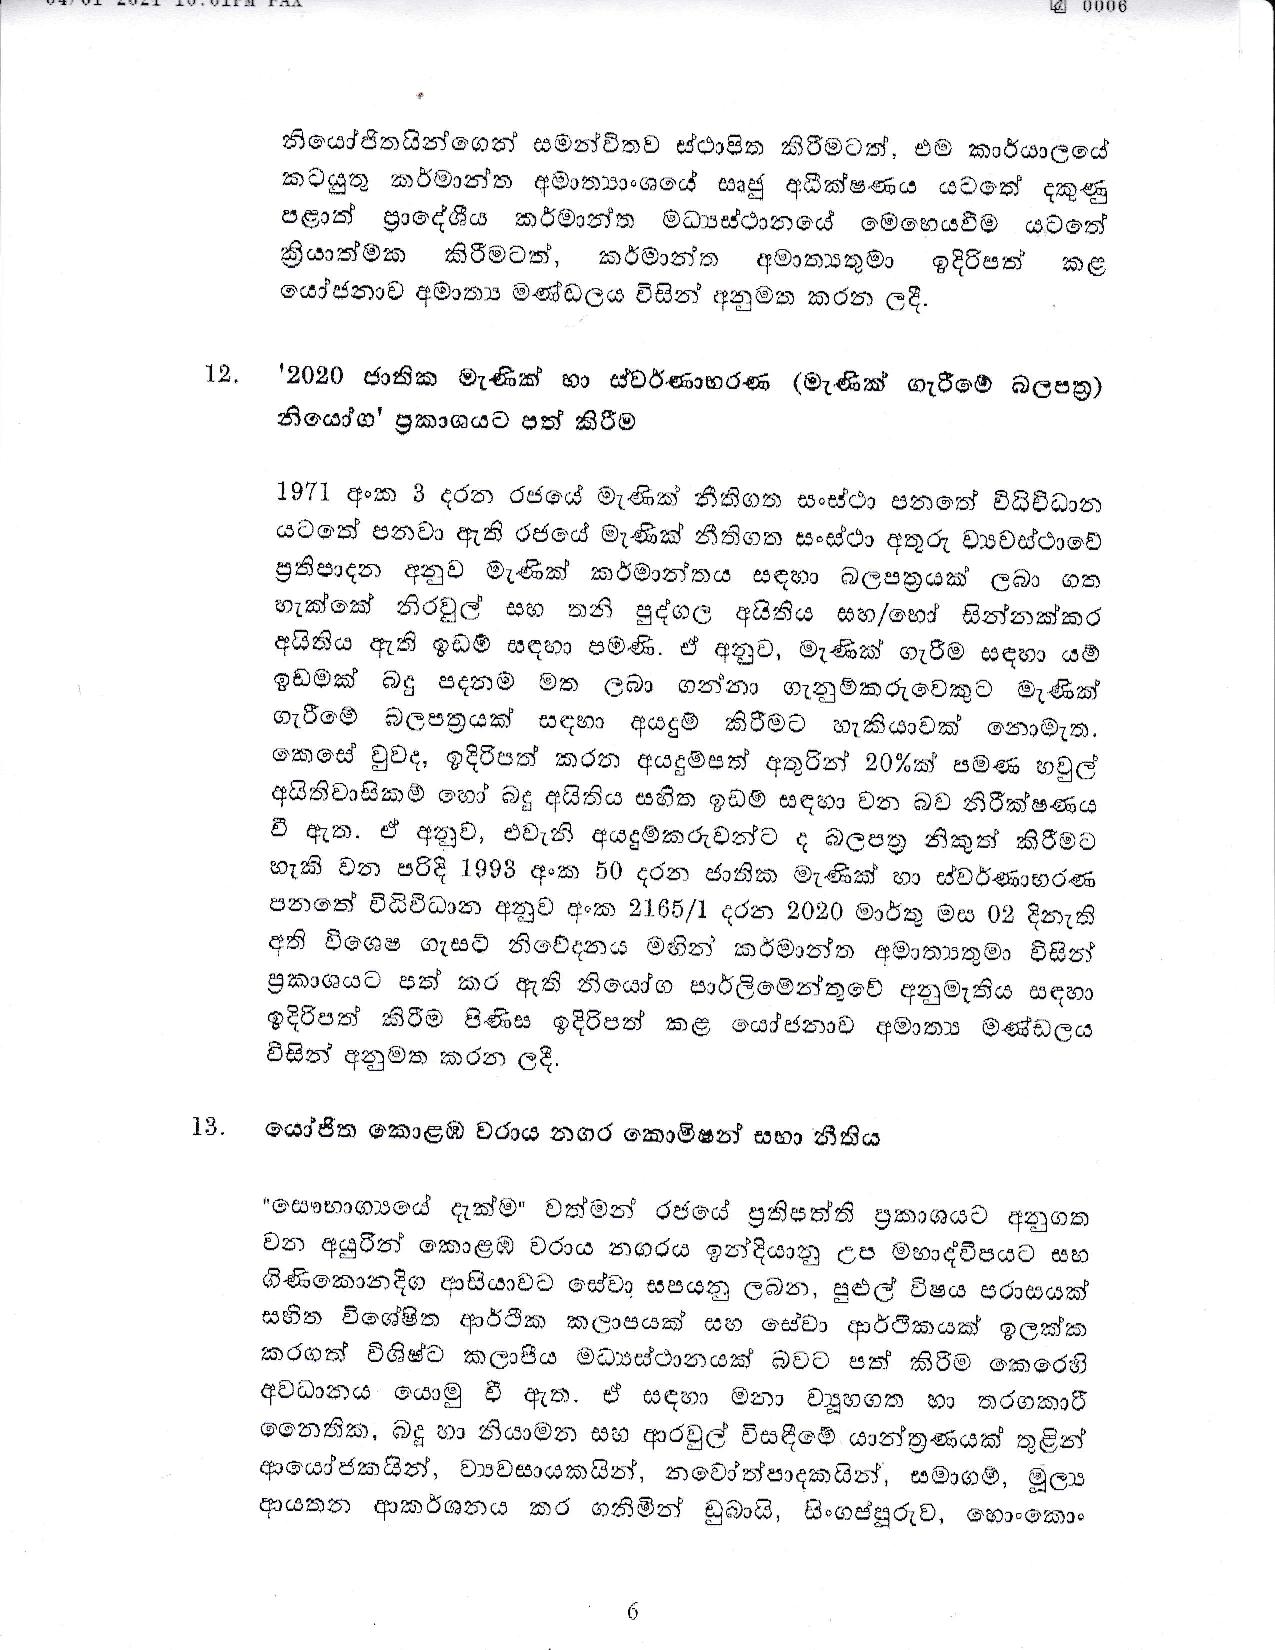 Cabinet Decision on 04.01.2021 page 006